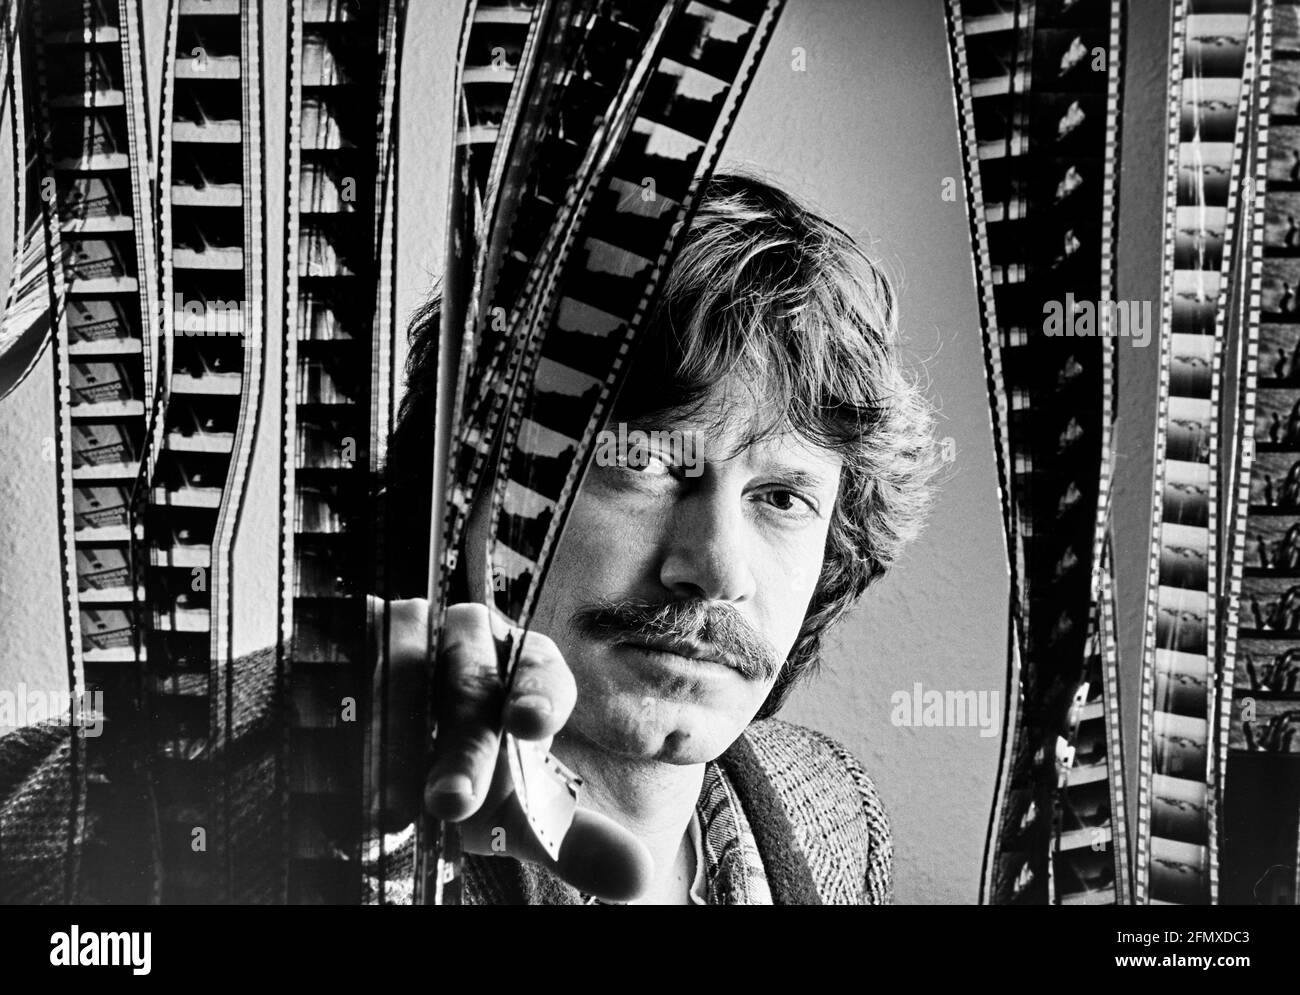 Turkish-born director Tevfik Baser behind filmstrips. Baser is the director of the successful 1985 film '40 Square Meter Deutschland'. 13.02.1987 - Ch Stock Photo